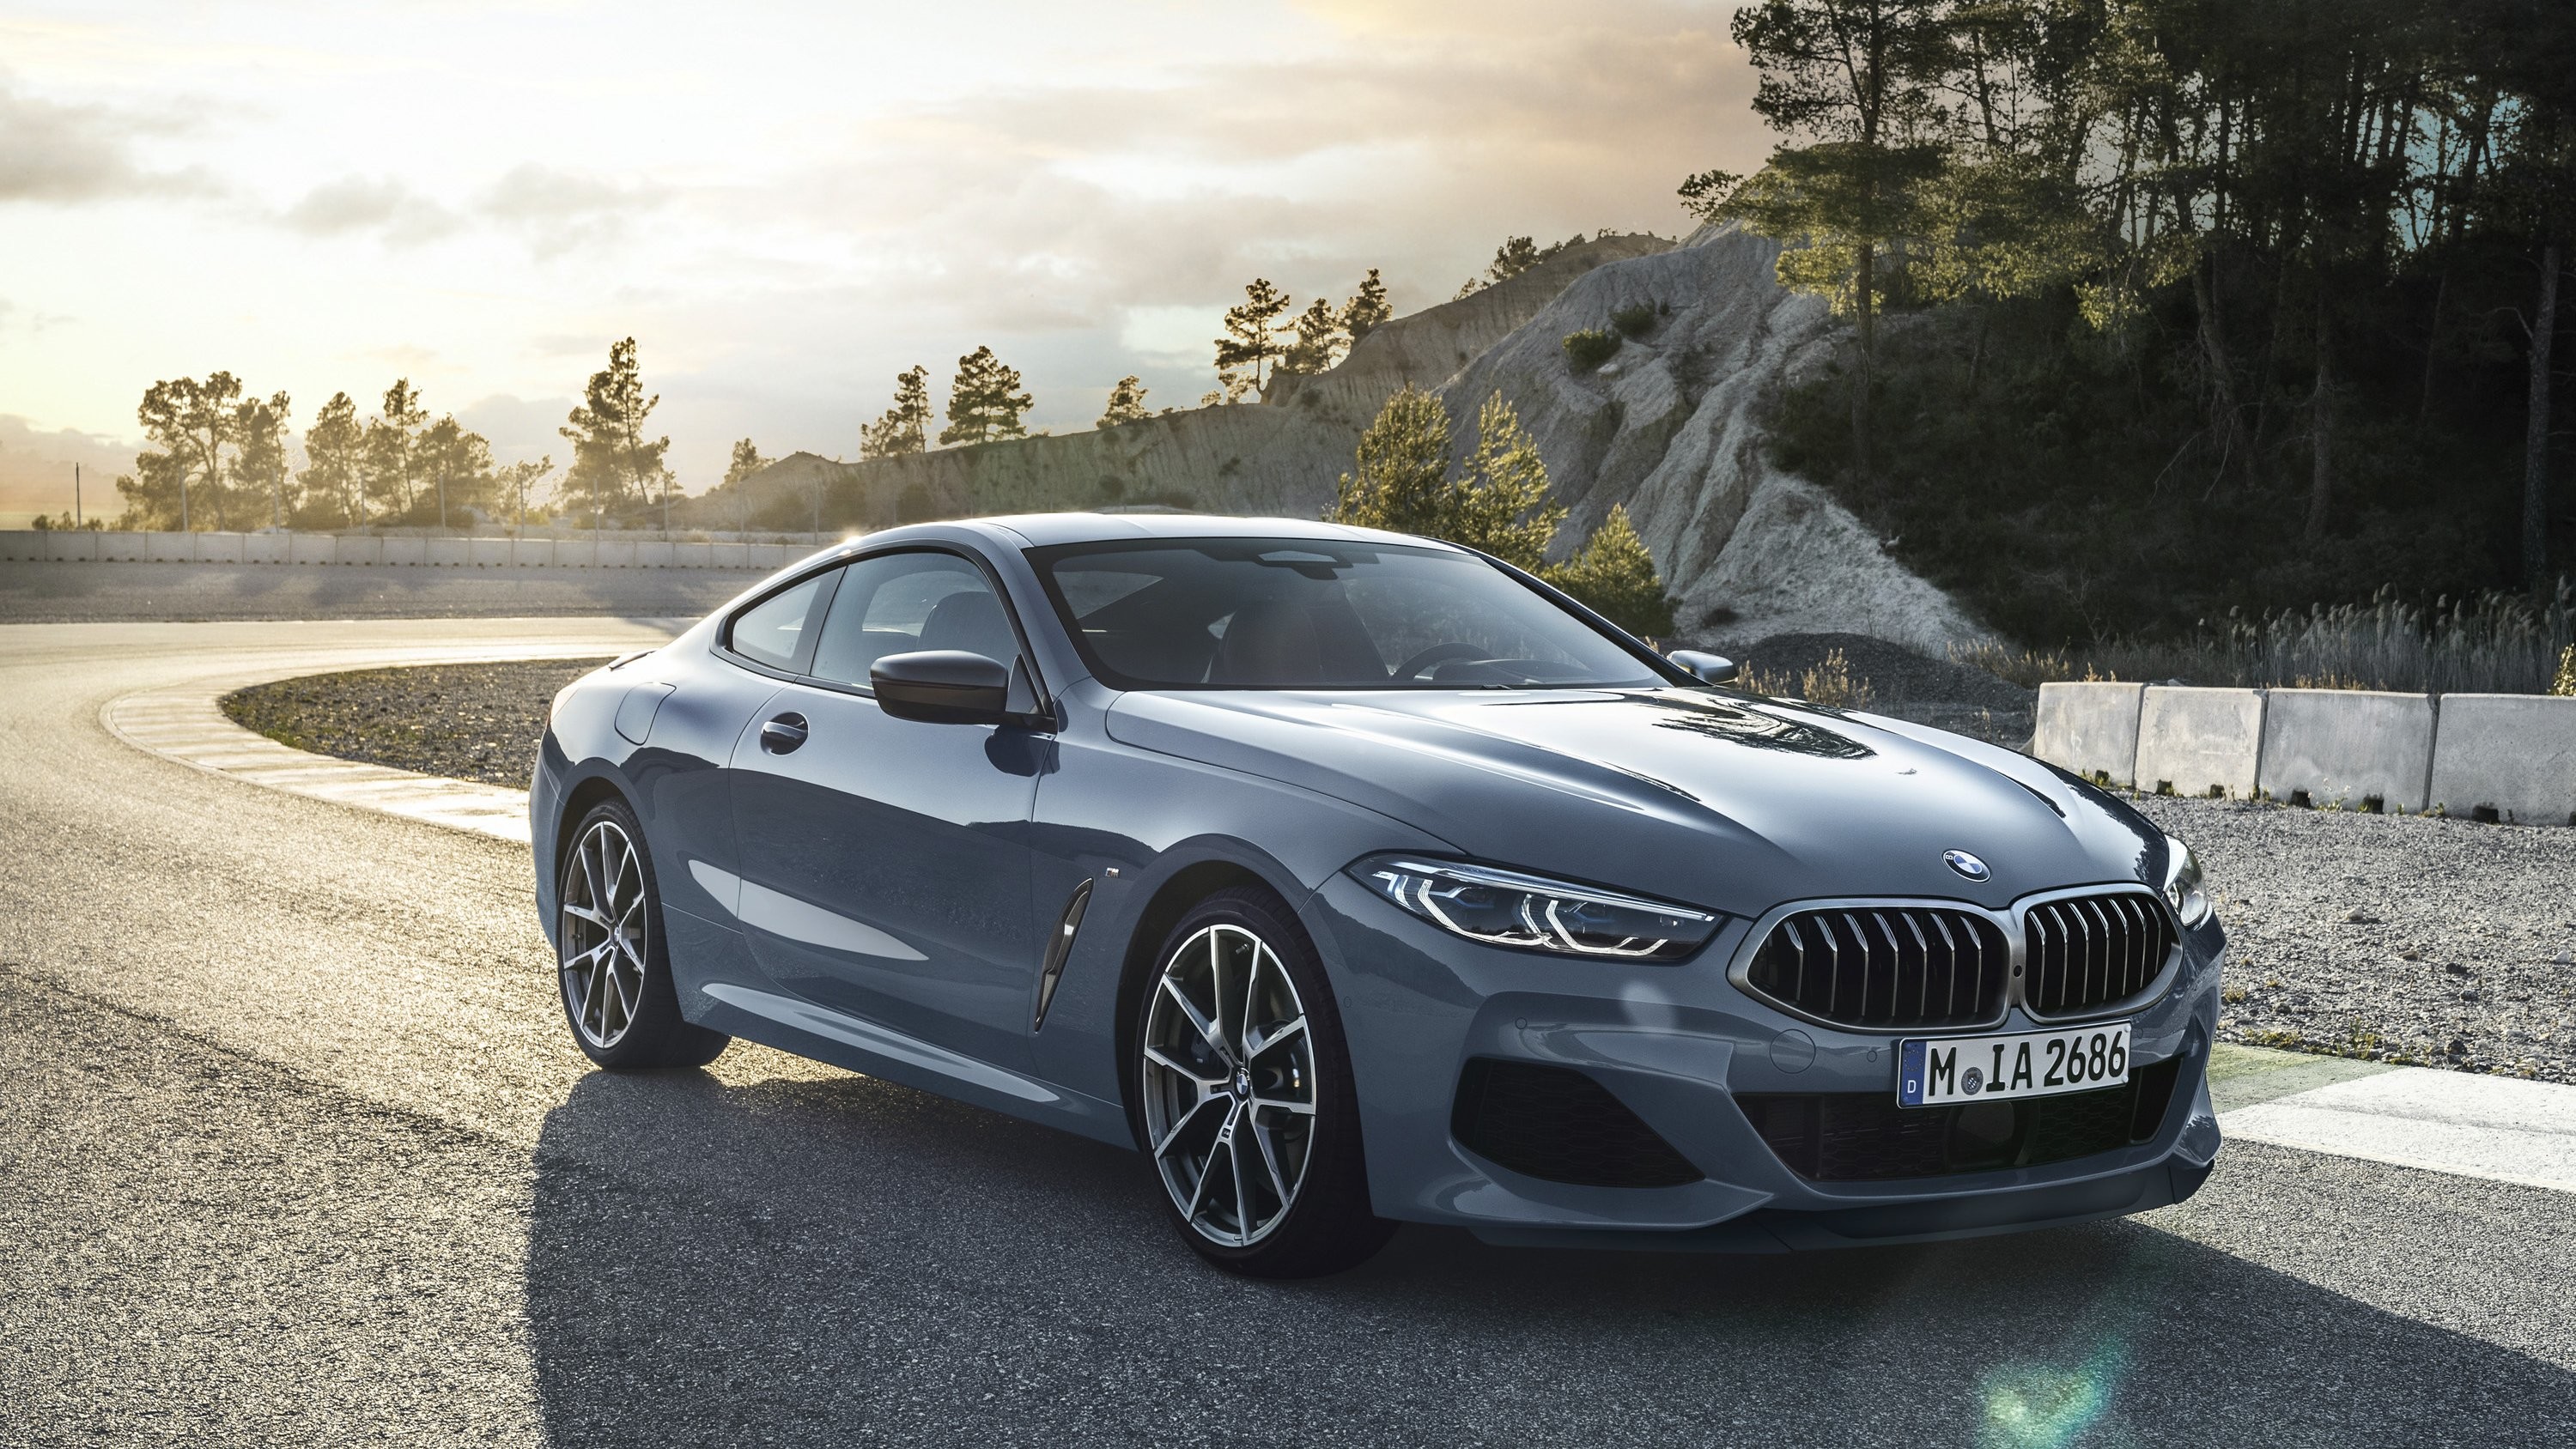 3000x1688 2019 BMW 8 Series Pictures, Photos, Wallpapers.